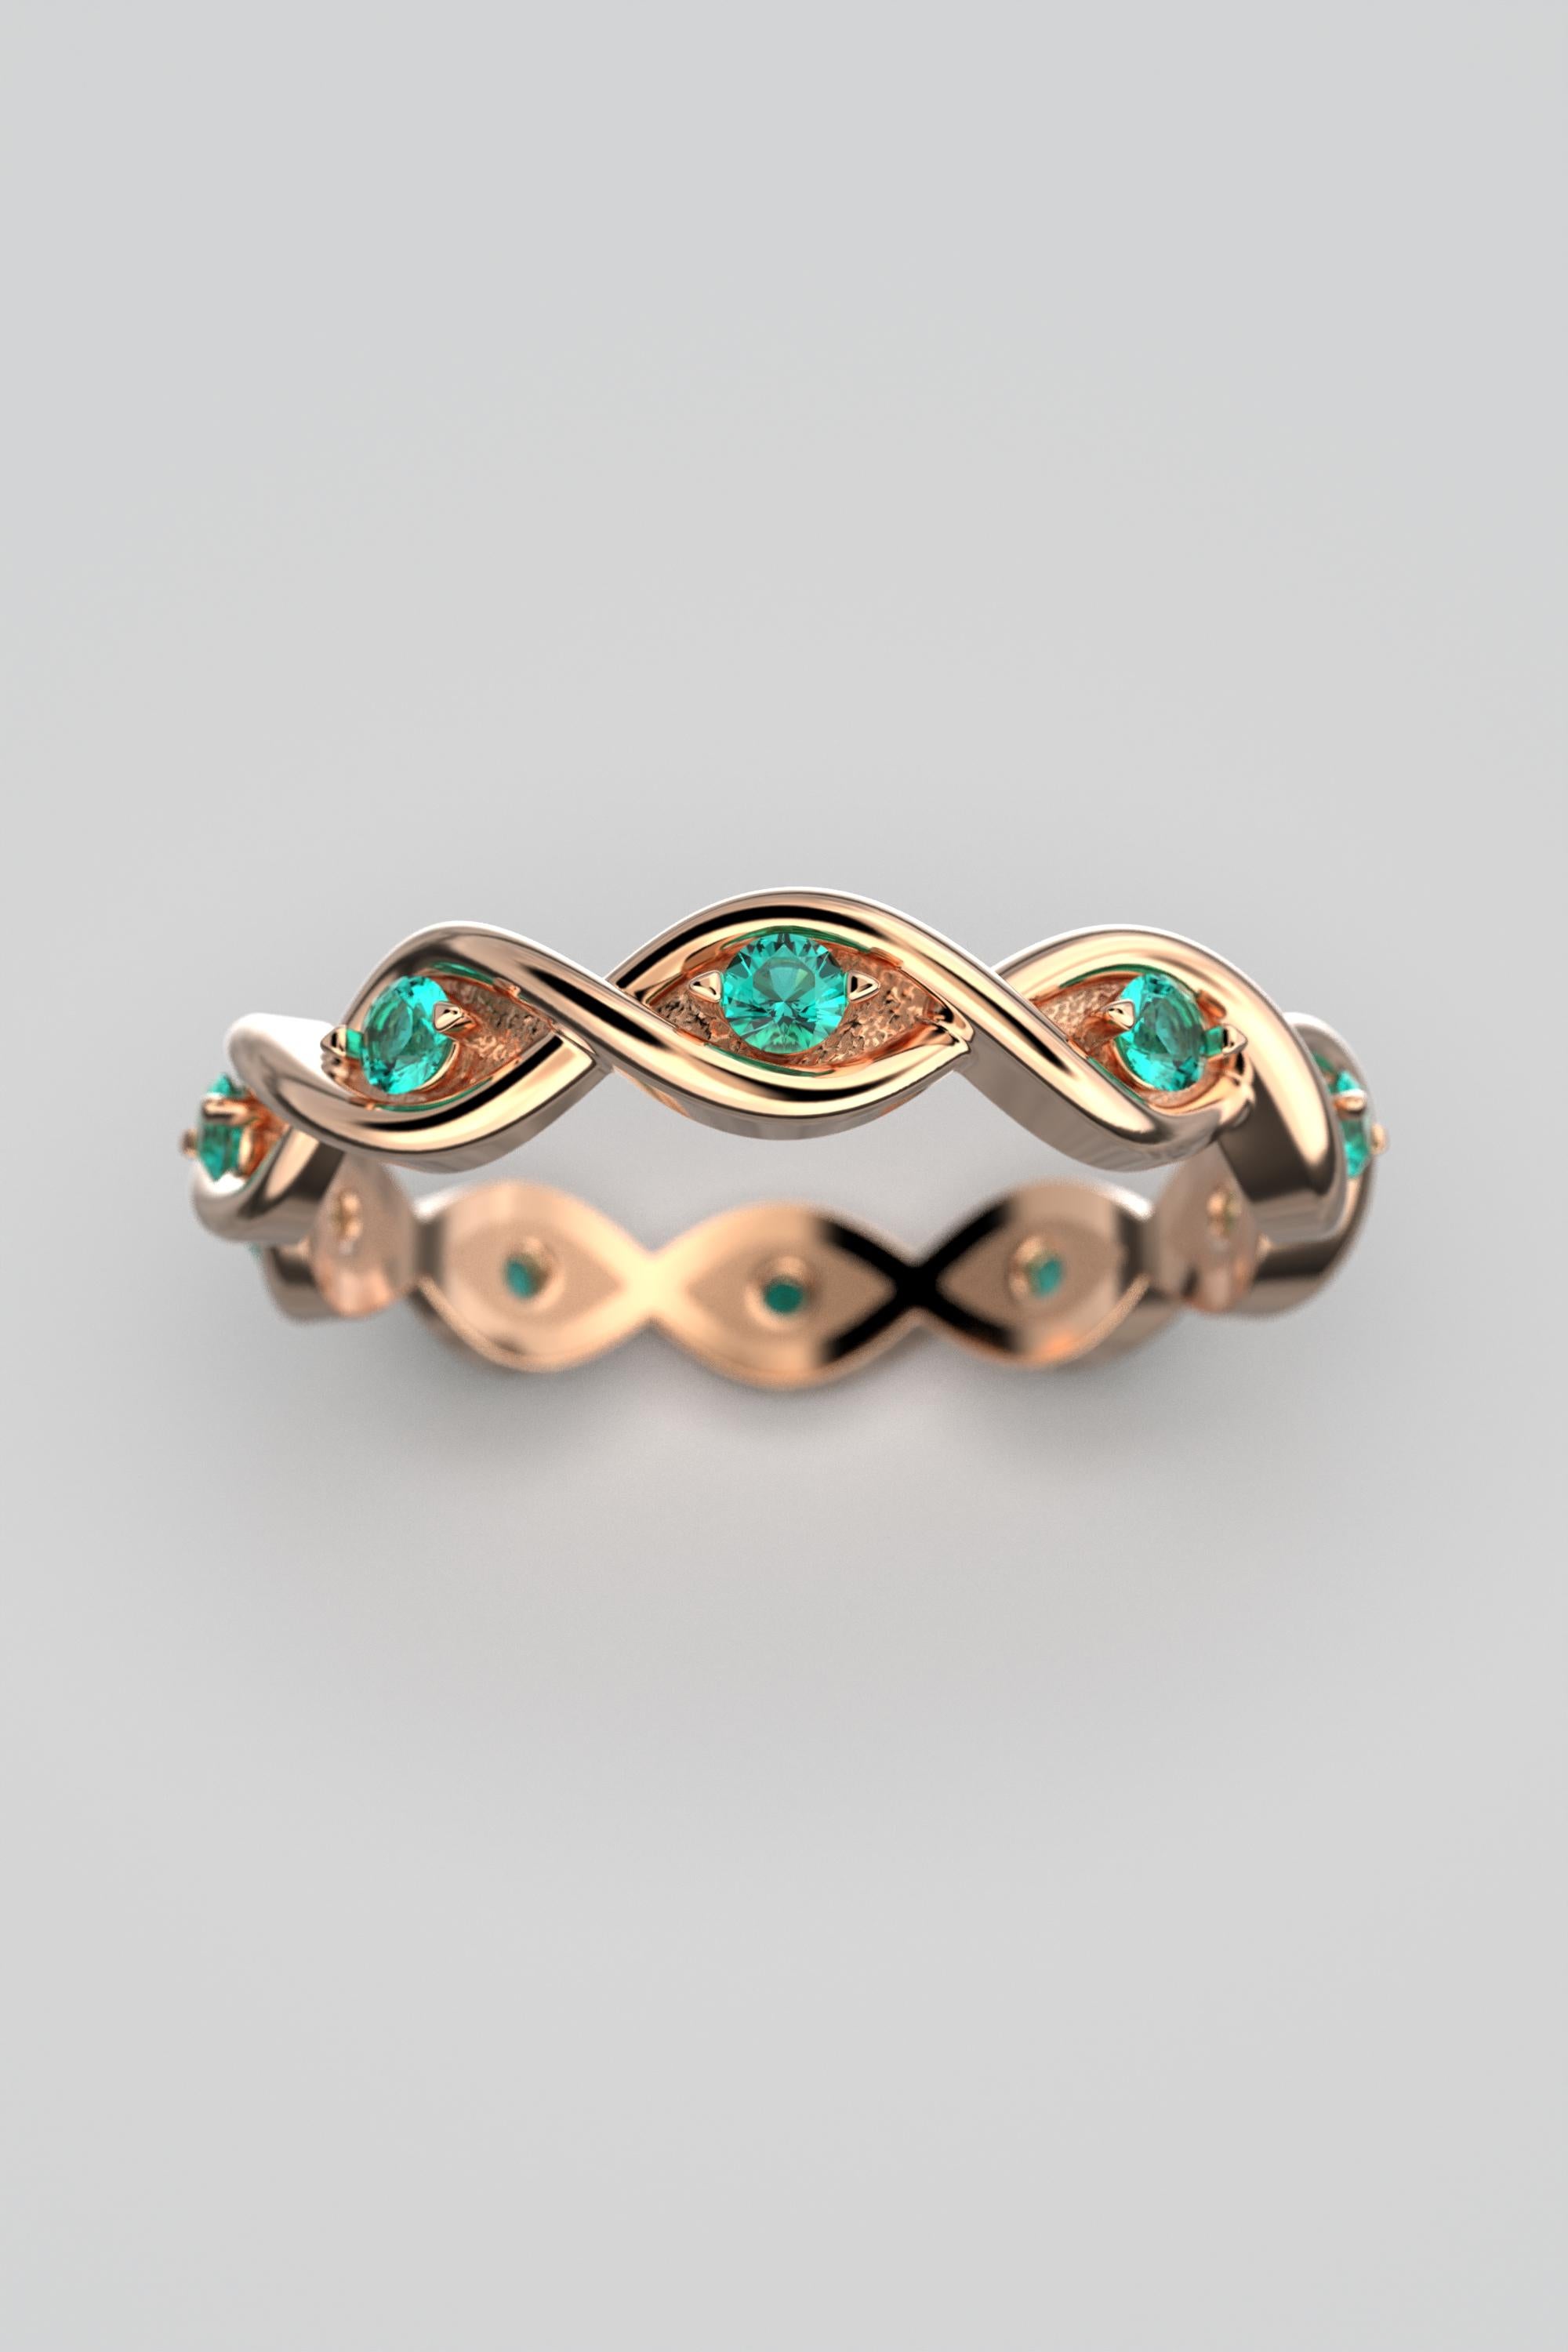 For Sale:  Oltremare Gioielli Emerald Gold Eternity Band in 14k, Made in Italy 6